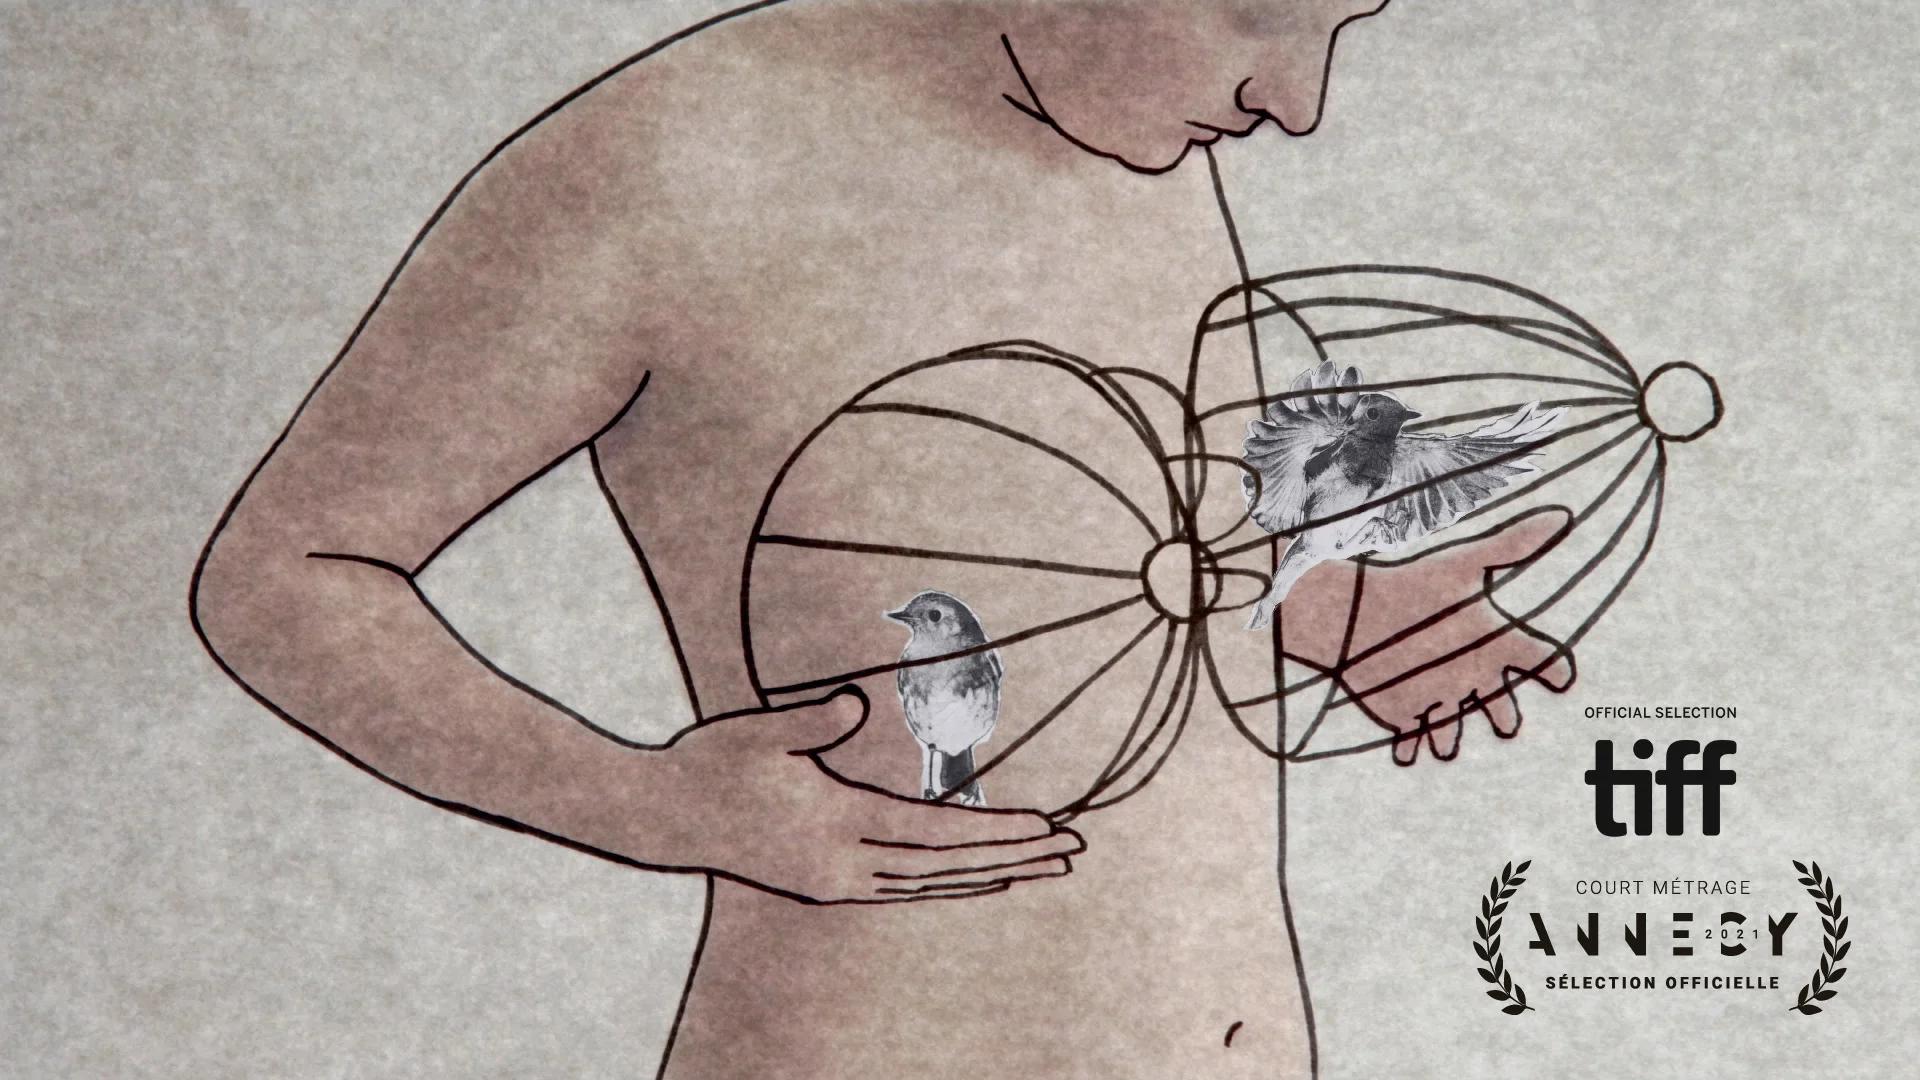 Lolos (Boobs) – a short film by Marie Valade on Vimeo [Video]